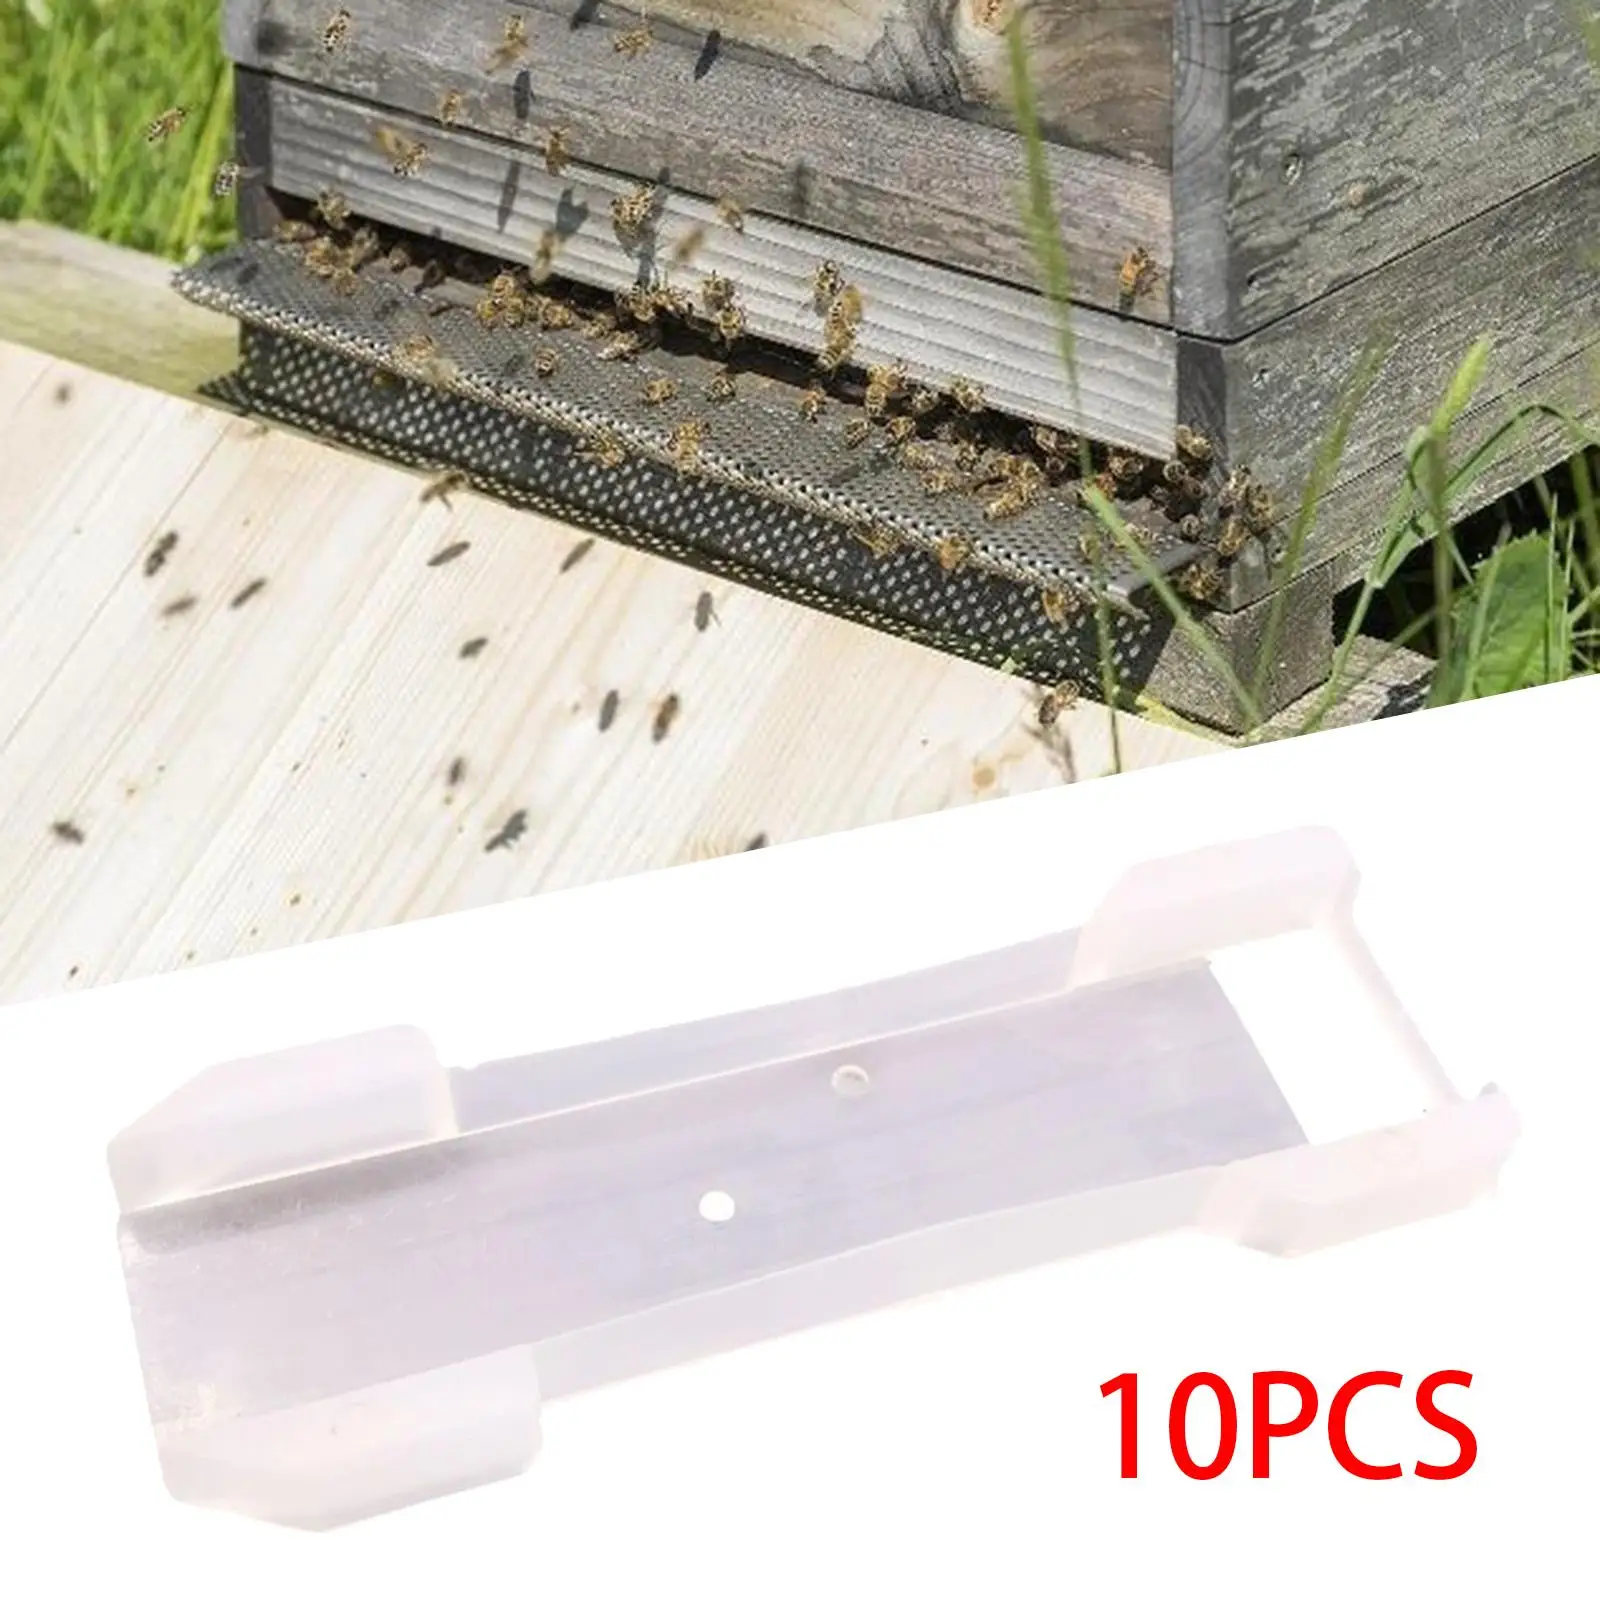 10 Pieces Plastic Beekeeping Hive Frame Crimper Nest Box Tight Yarn Wire Livestock Supplies Bee Hive Hand Tool Beekeeper Tool